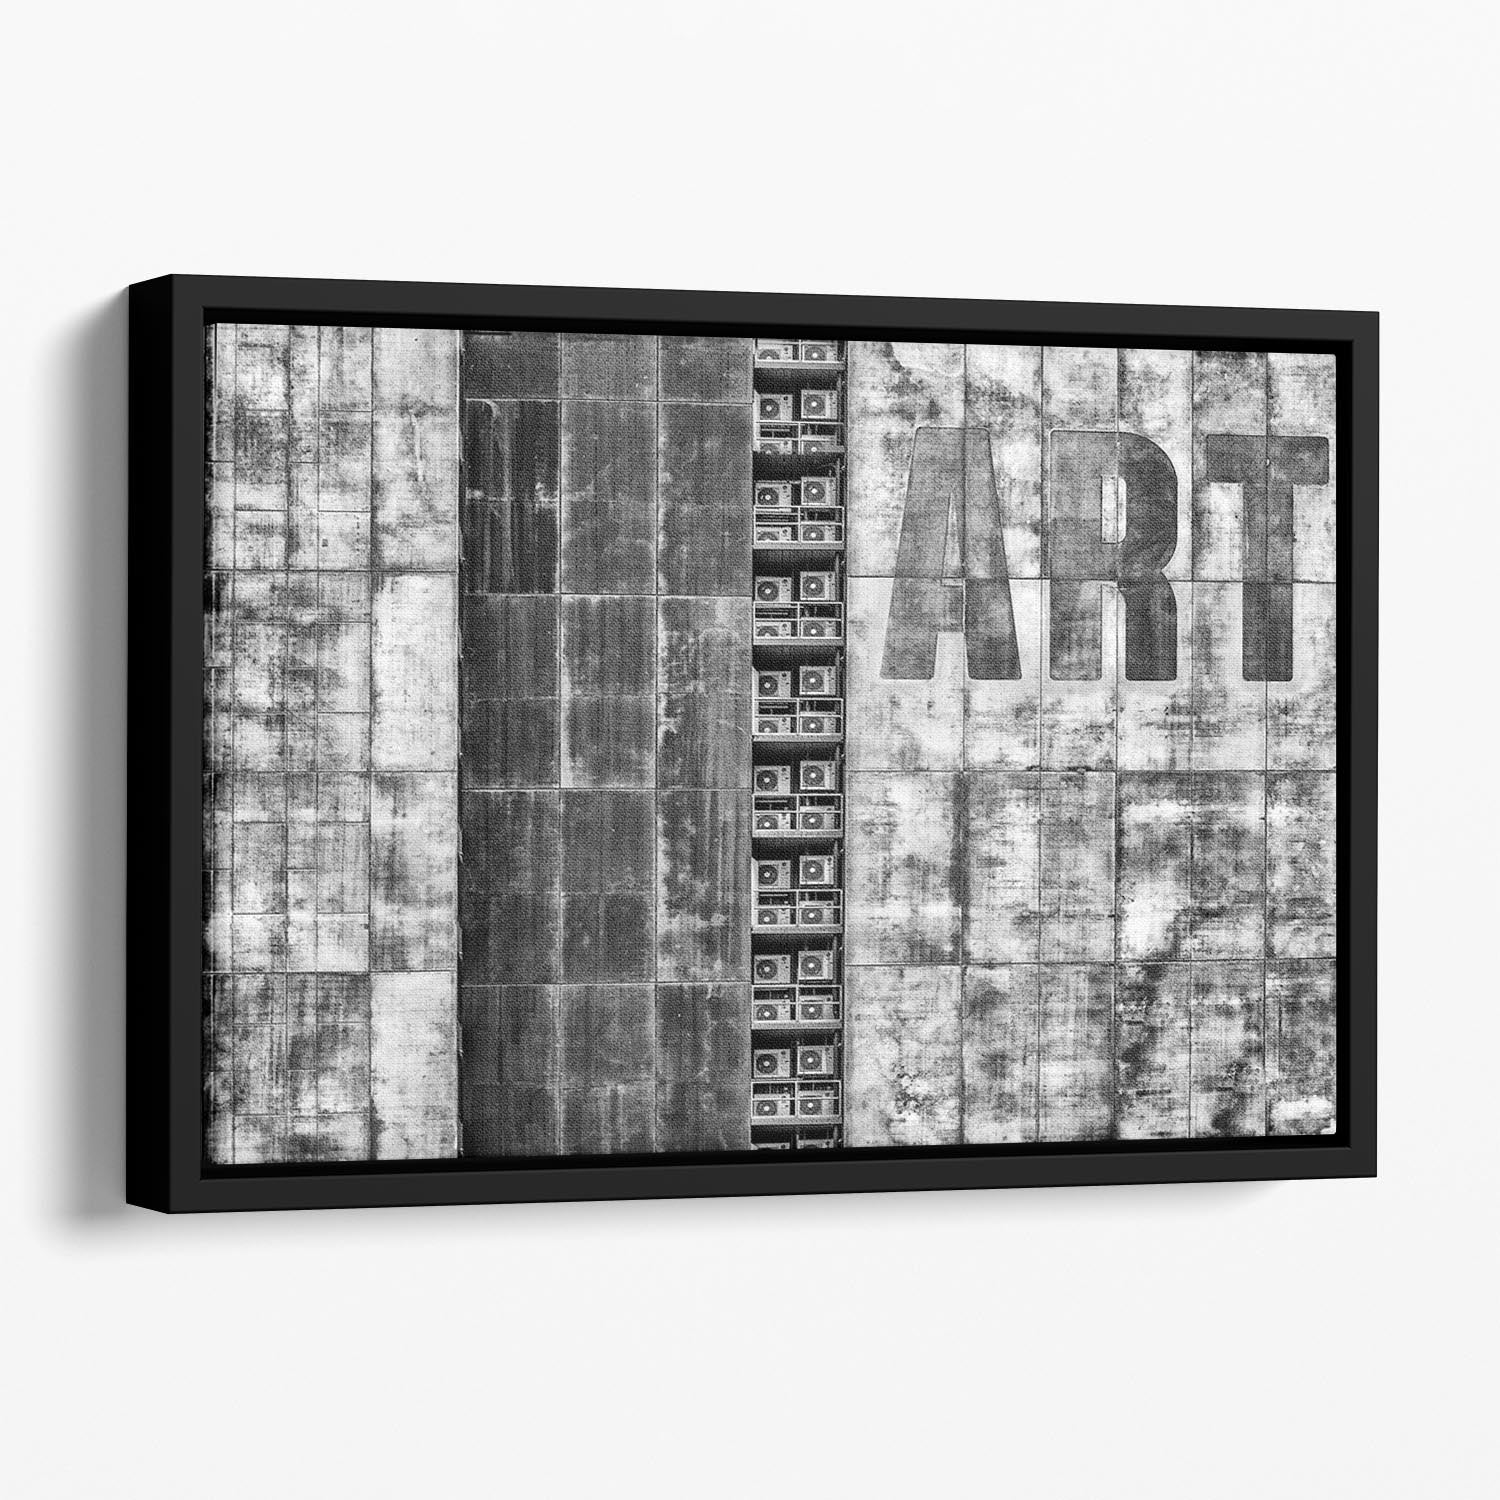 Gritty Palace Floating Framed Canvas - Canvas Art Rocks - 1